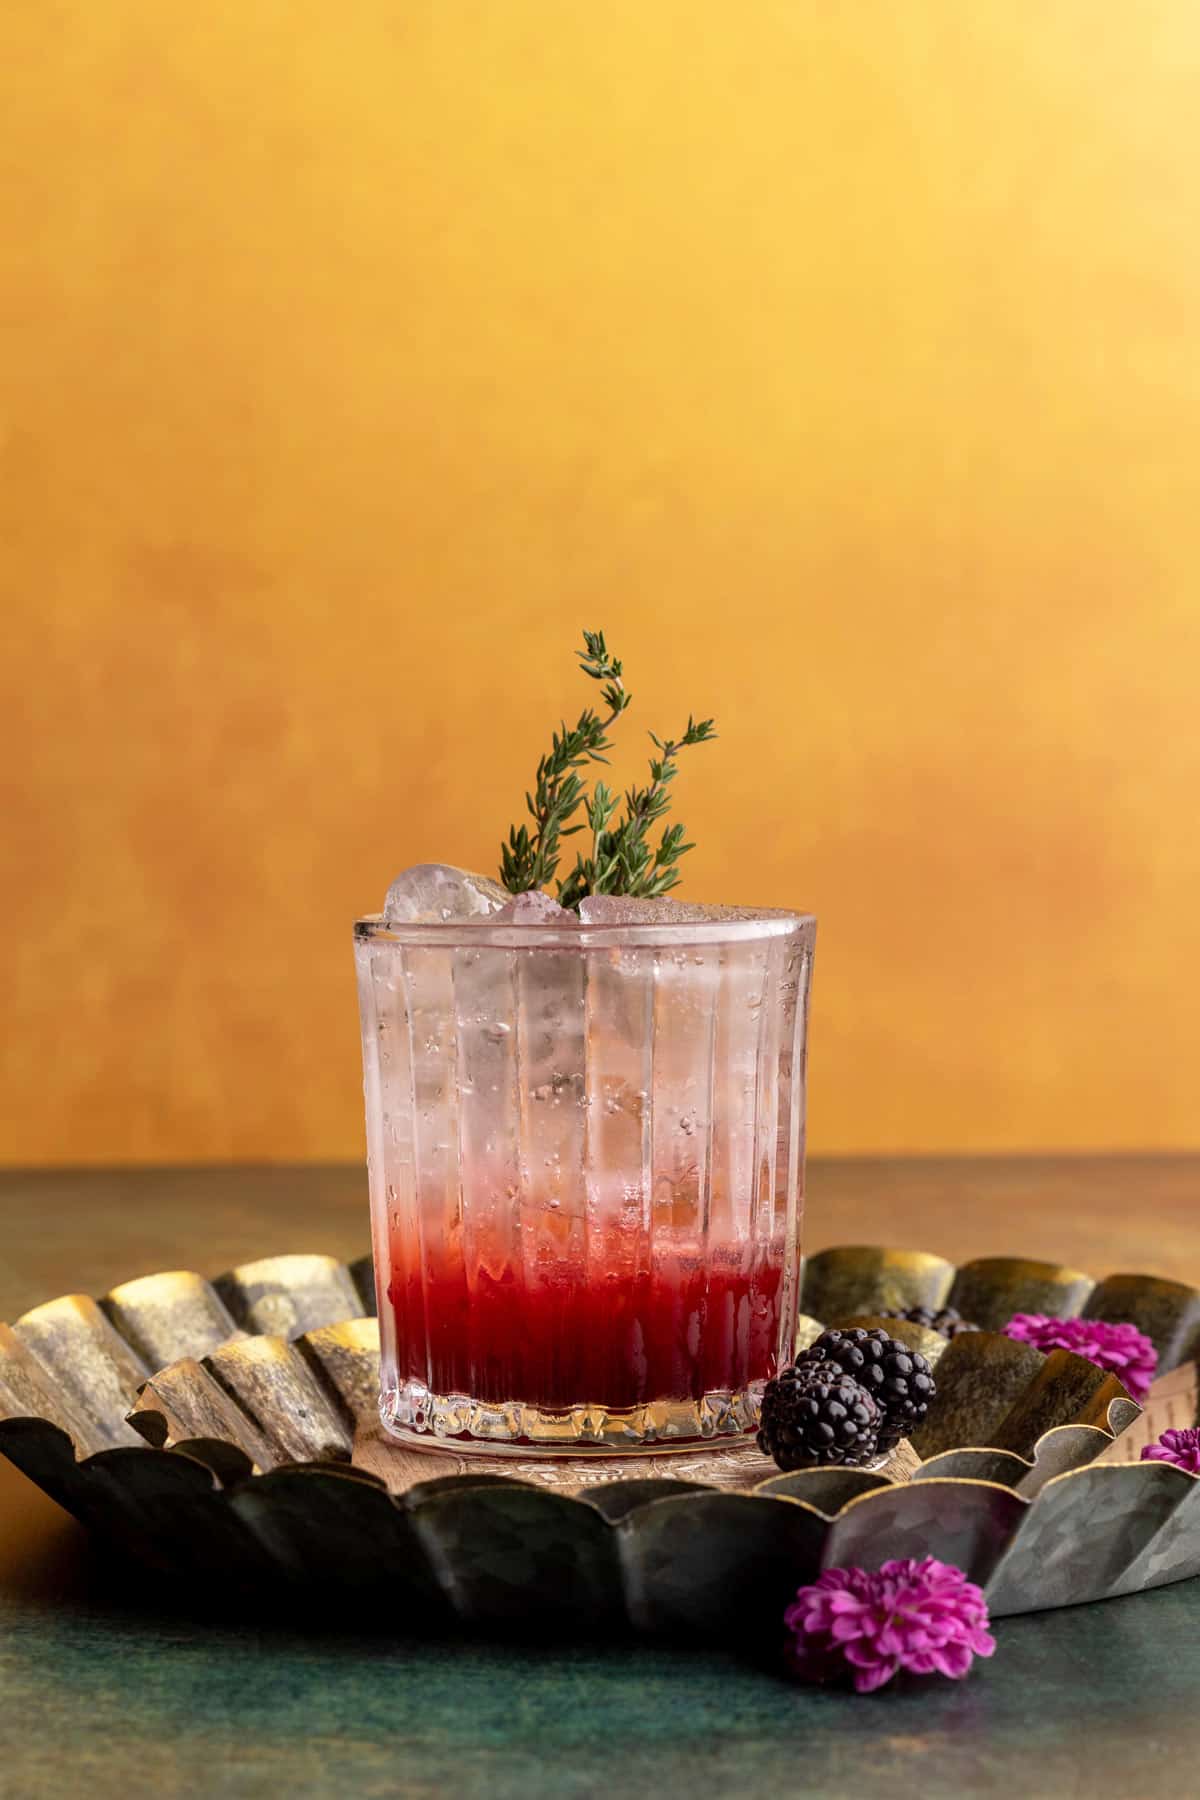 Blackberry mocktail with thyme as garnish head-on.